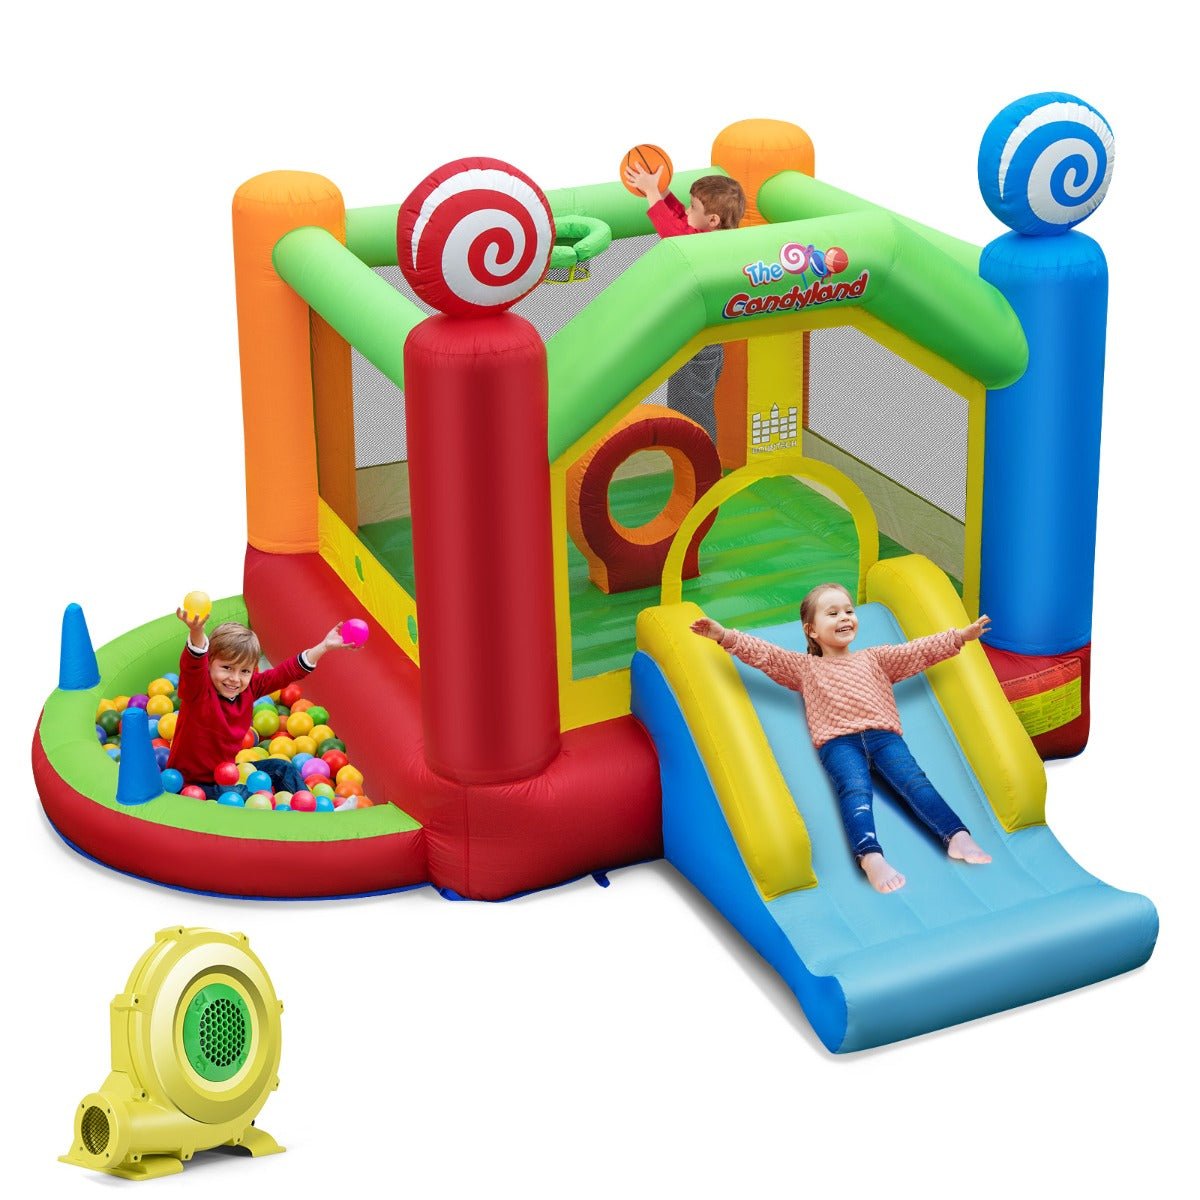 Quality Candy Land Bounce House - Get Yours Today!